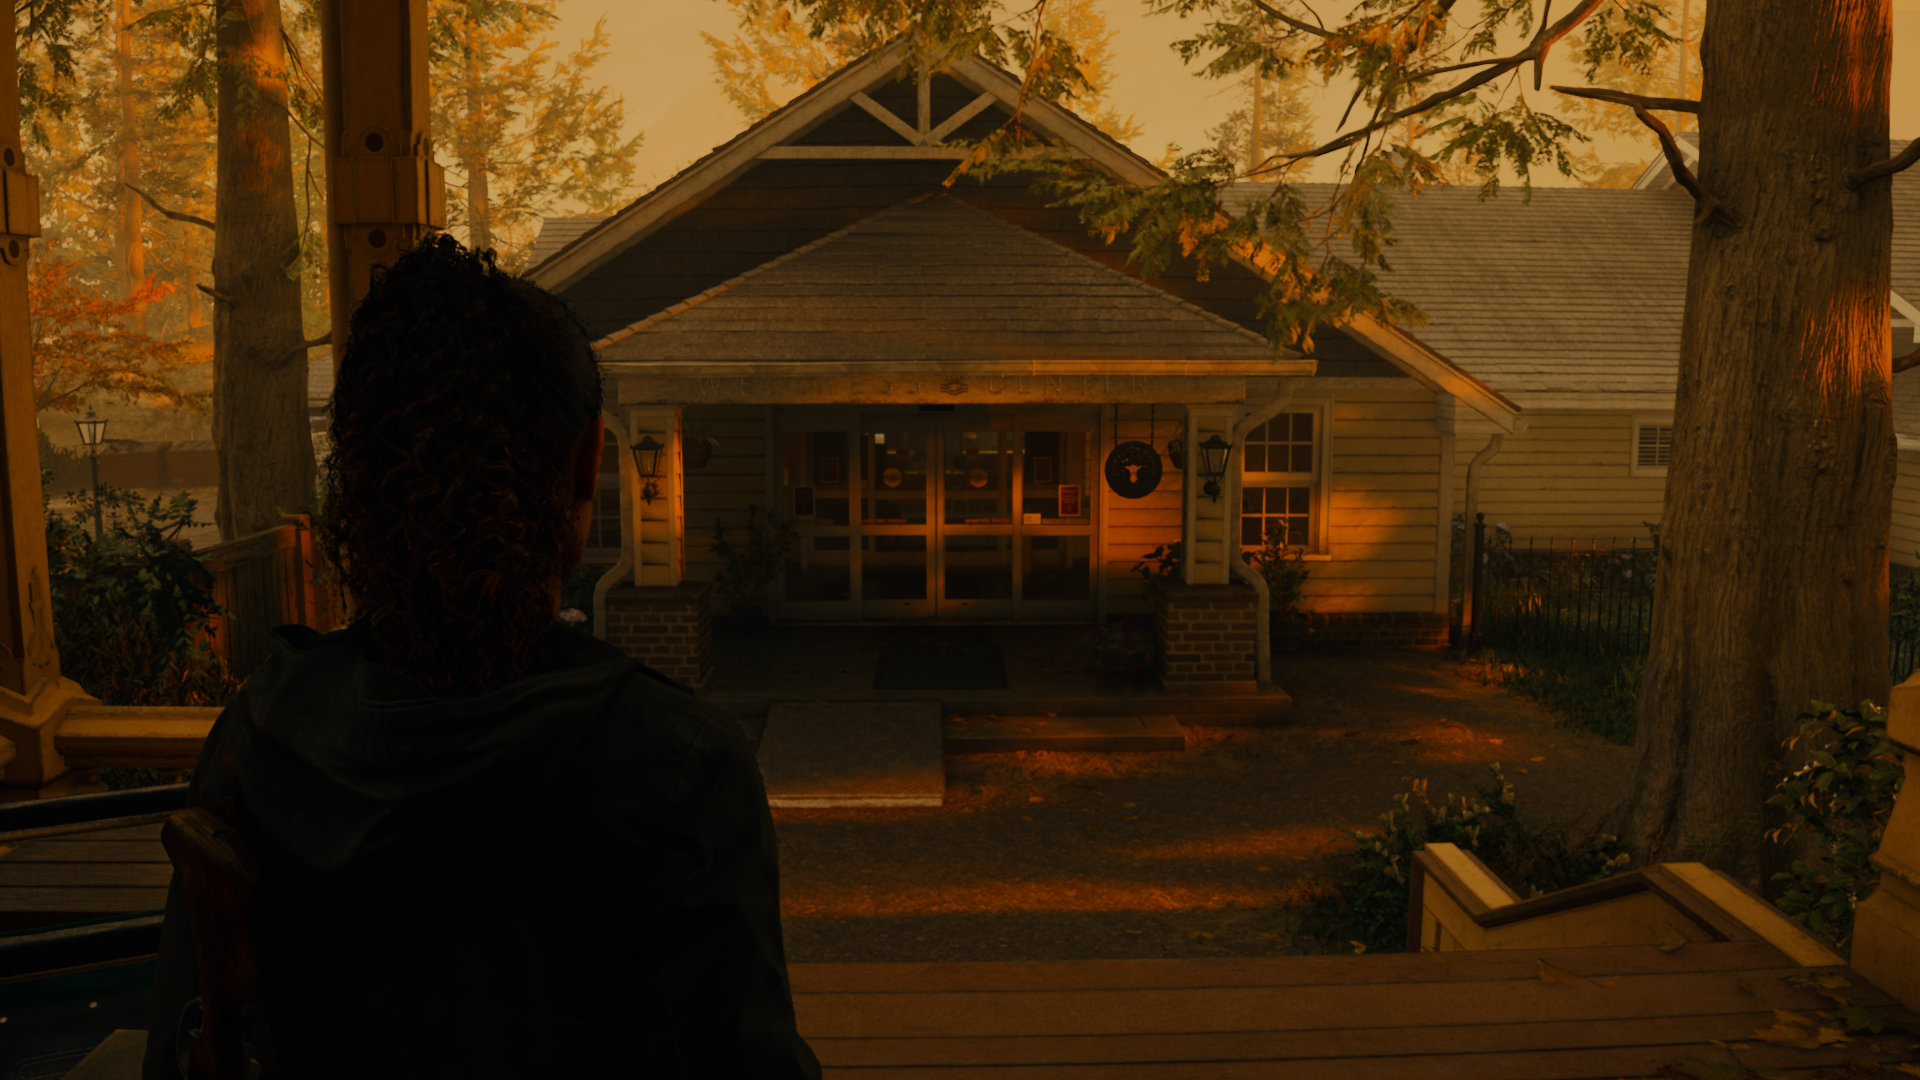 Alan Wake 2 Most Hunted Game, System Requirements, Updates